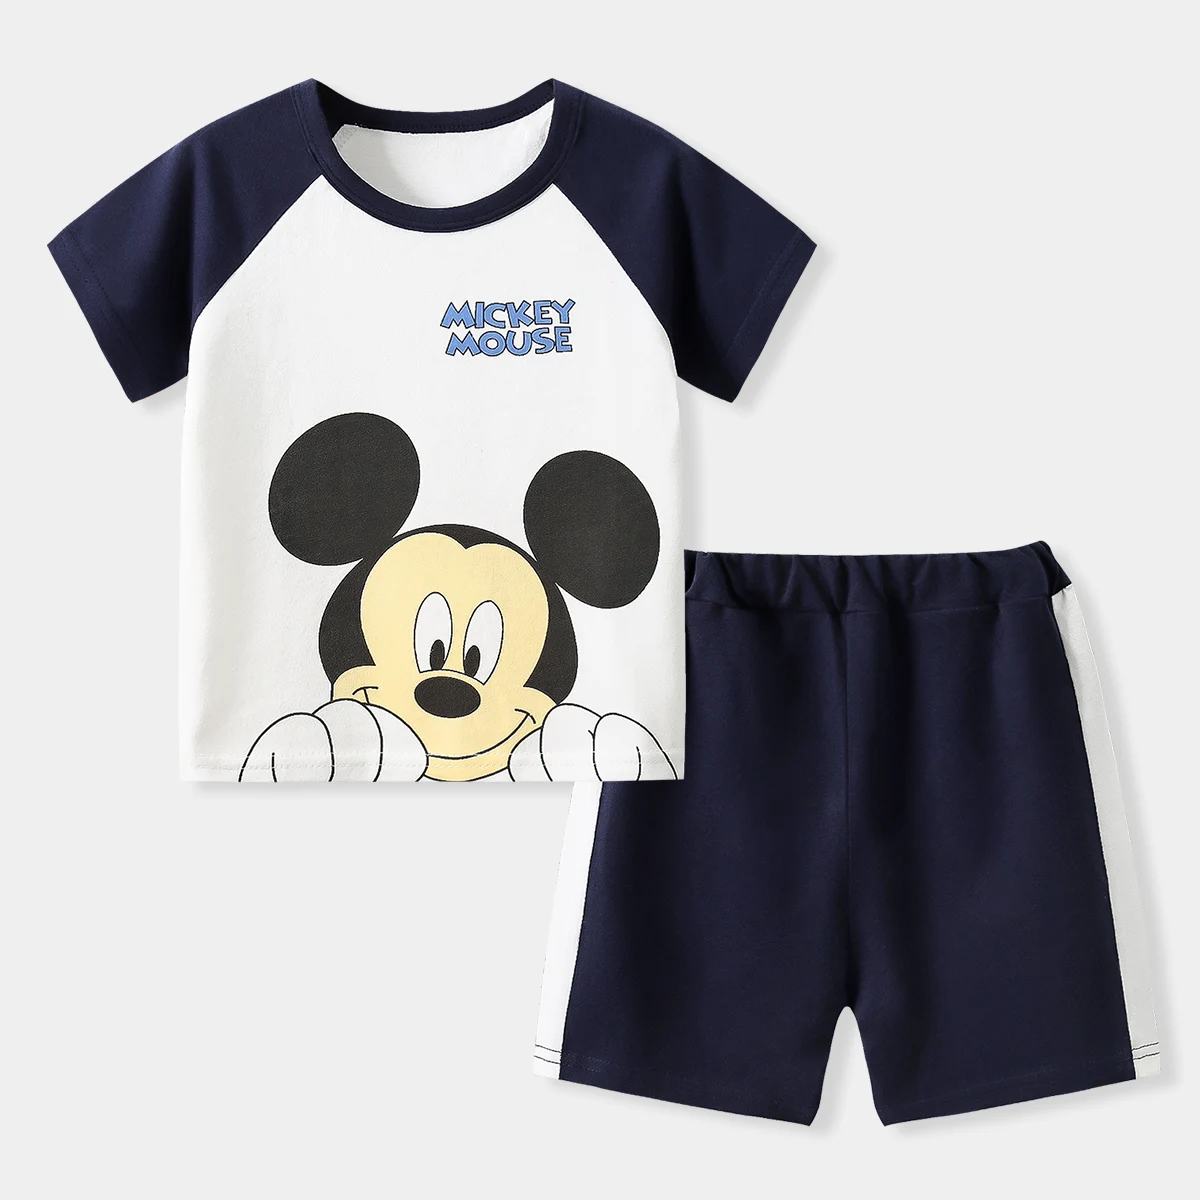 Short Sleeve Tshirt Shorts Two Piece Casual Sports Cotton Wear Babies Boys Round Neck Tops Set Cartoon Printed Summer Clothing